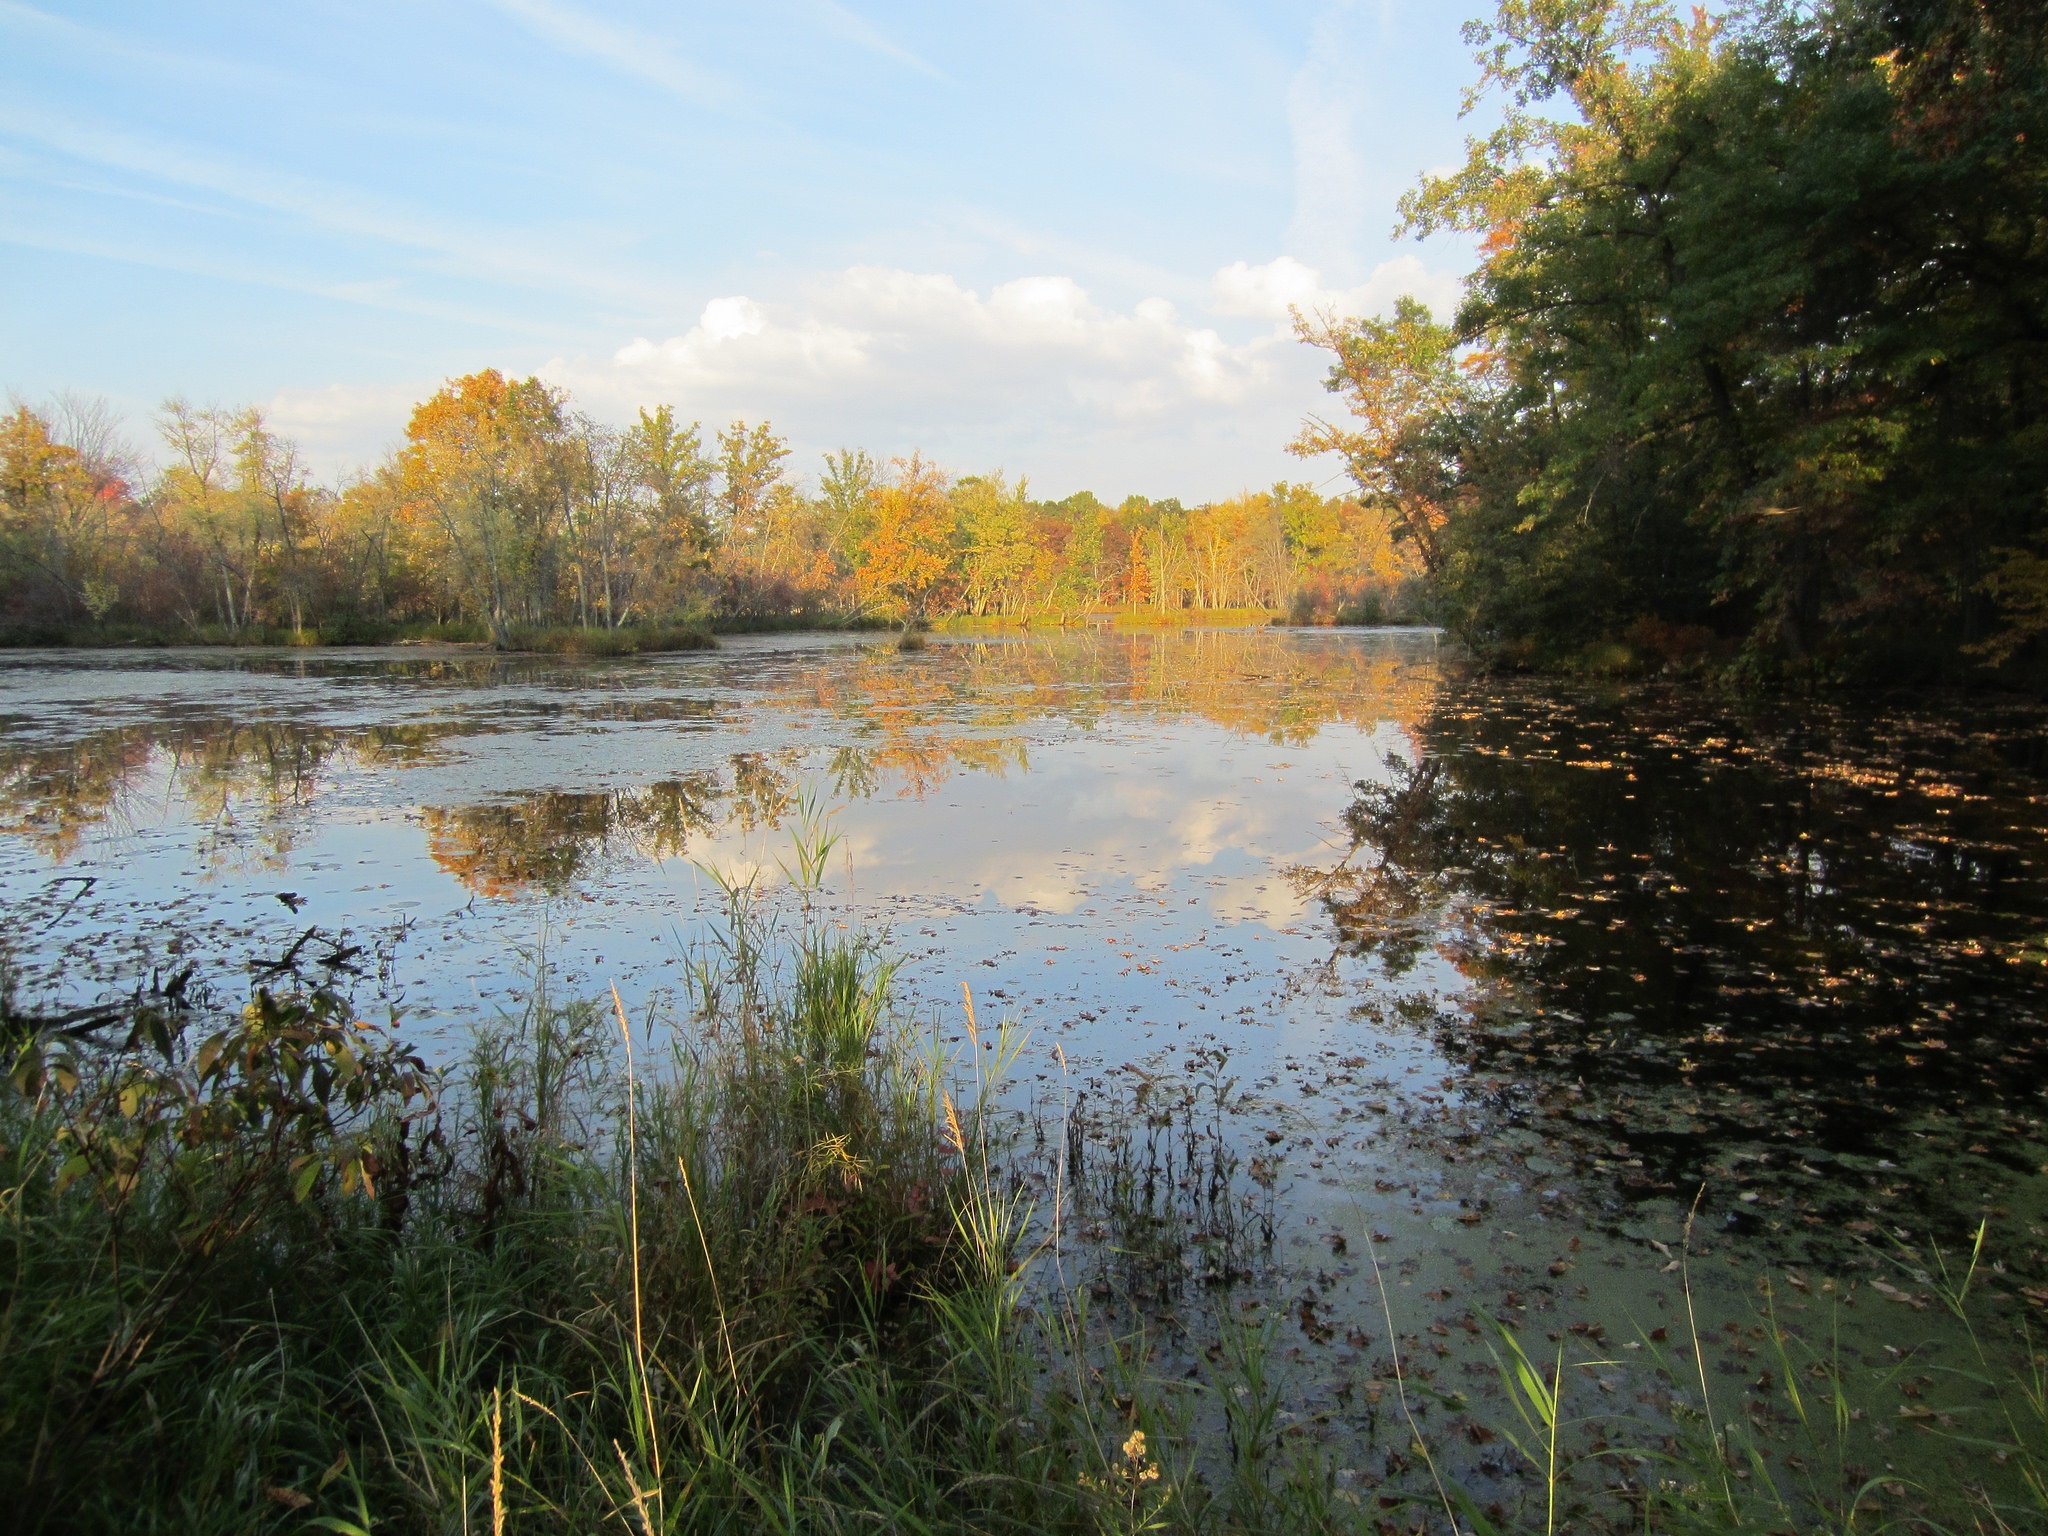 Mill Creek flows through Portage County, Wisconsin. The county is at the center of a statewide debate about high-capacity irrigation wells. Photo courtesy of Flickr/Creative Commons user jentastic